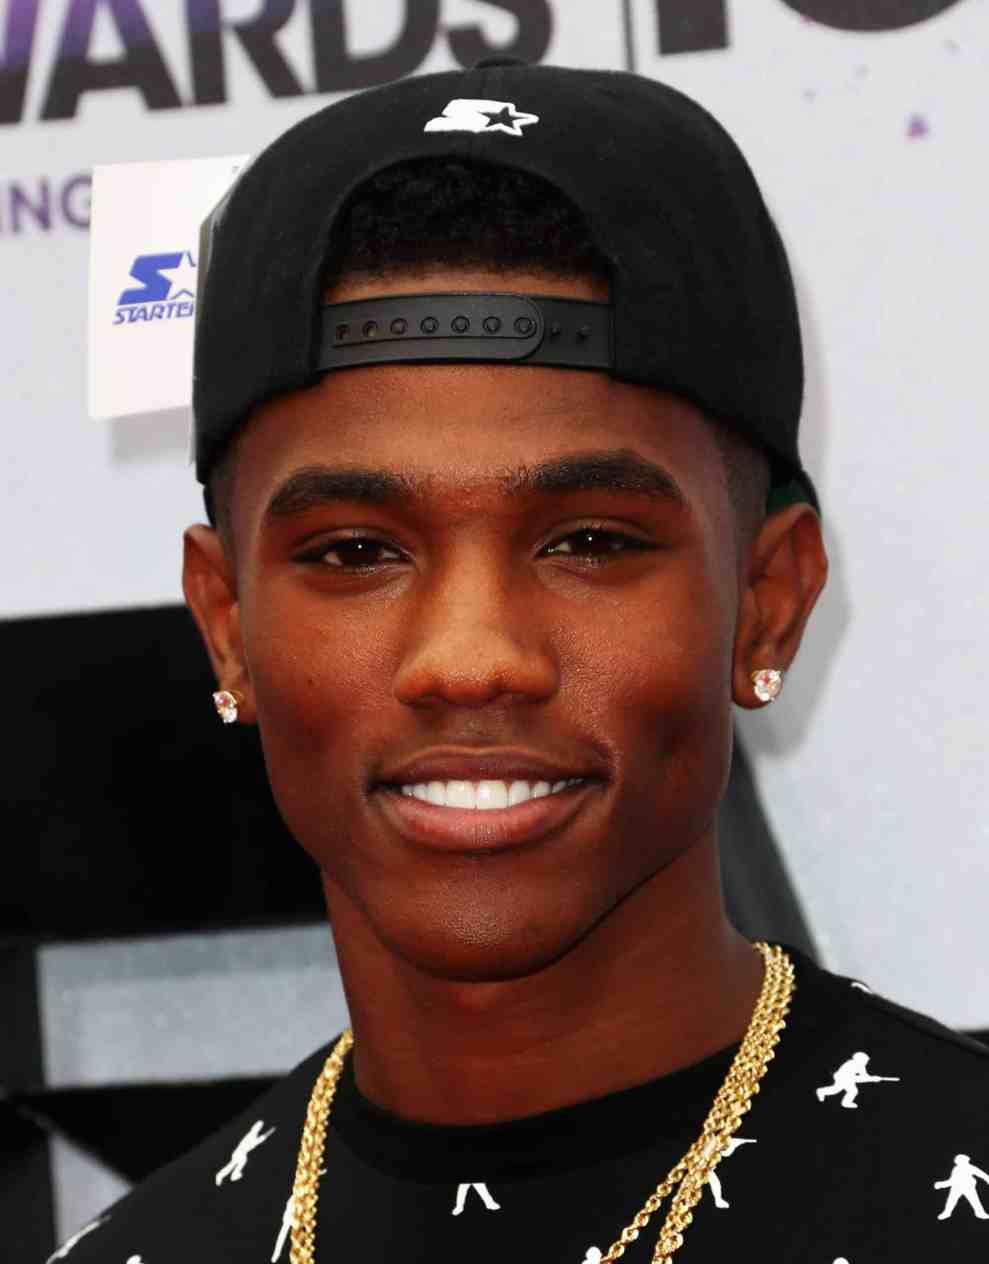 LOS ANGELES, CA - JUNE 30: Recording artist B Smyth attends the 2013 BET Awards at Nokia Theatre L.A. Live on June 30, 2013 in Los Angeles, California.